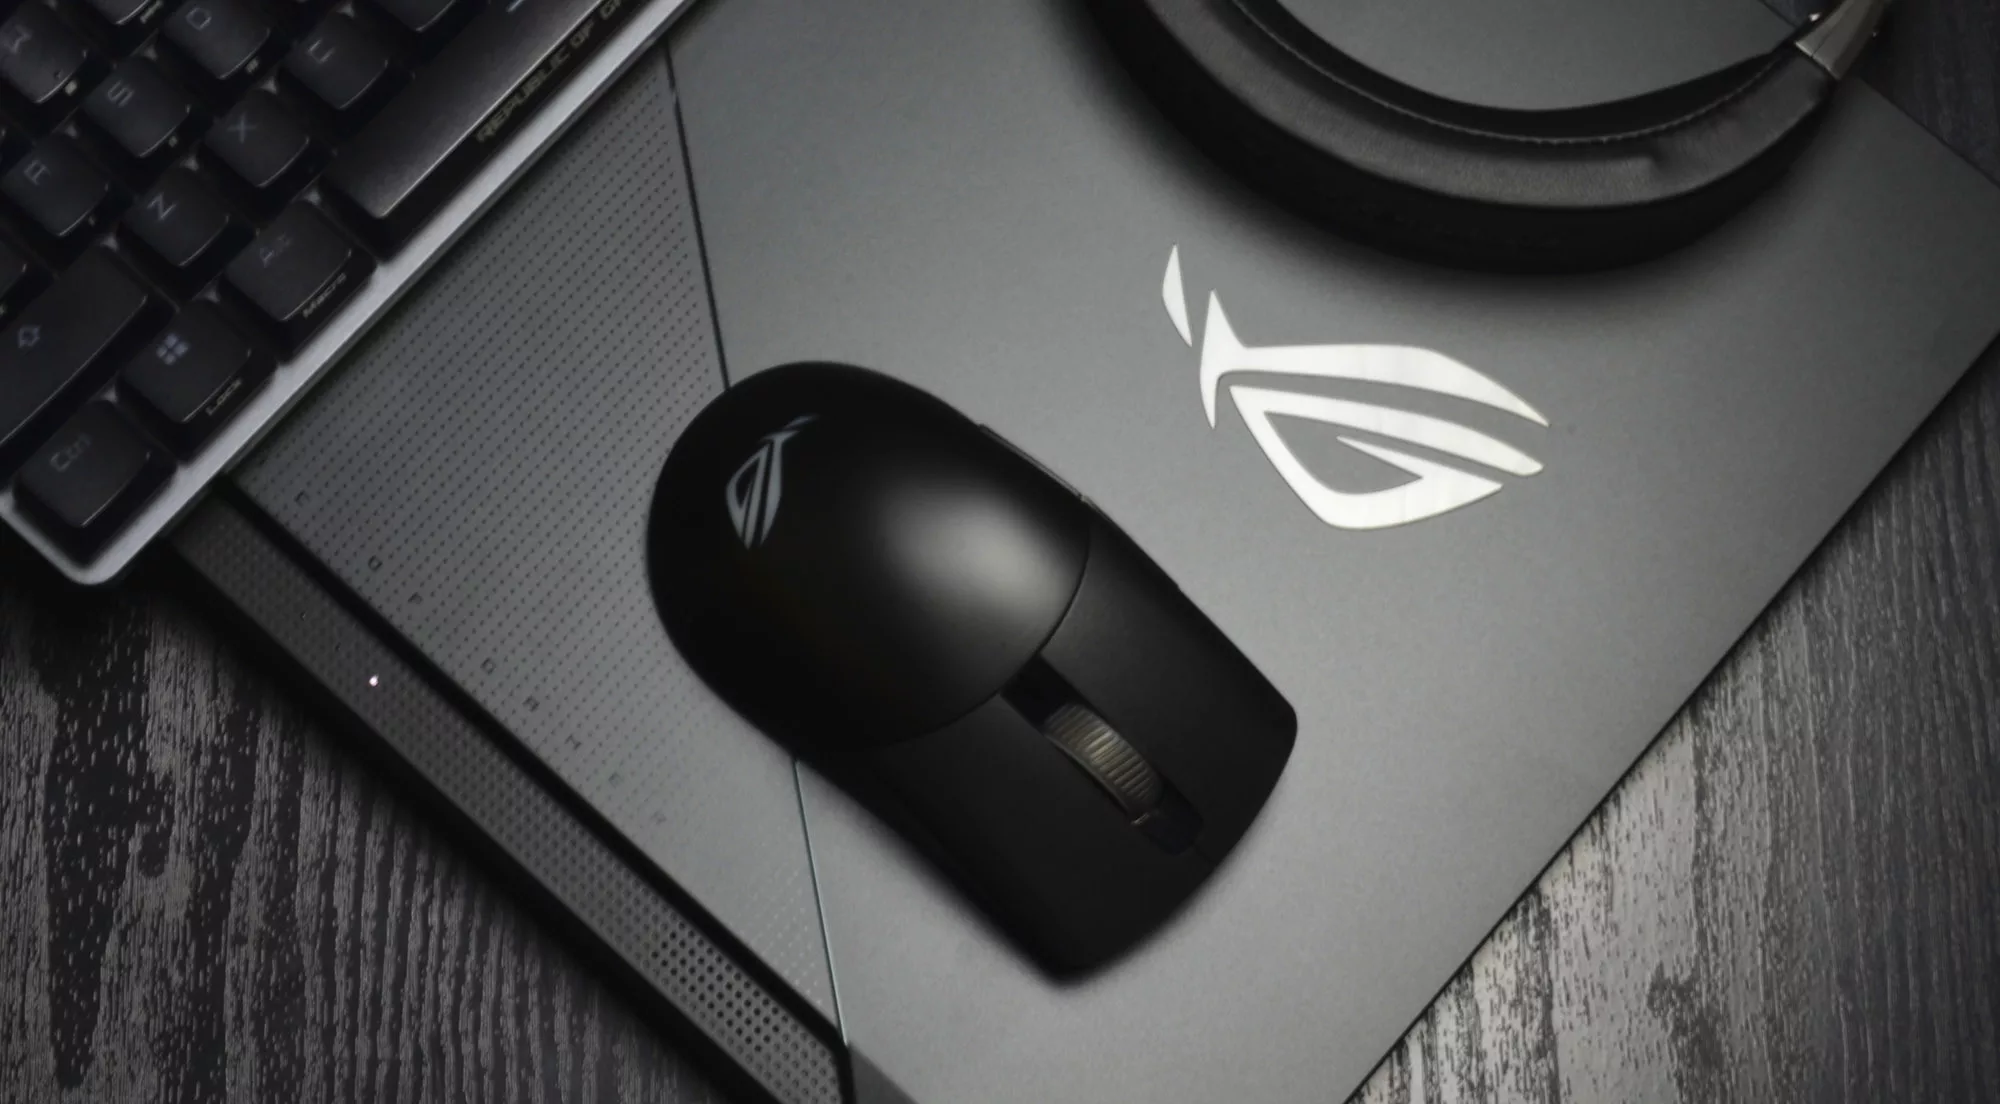 Pack Accessoires Gaming pour PC ASUS ROG (Souris Metal Gamer 6